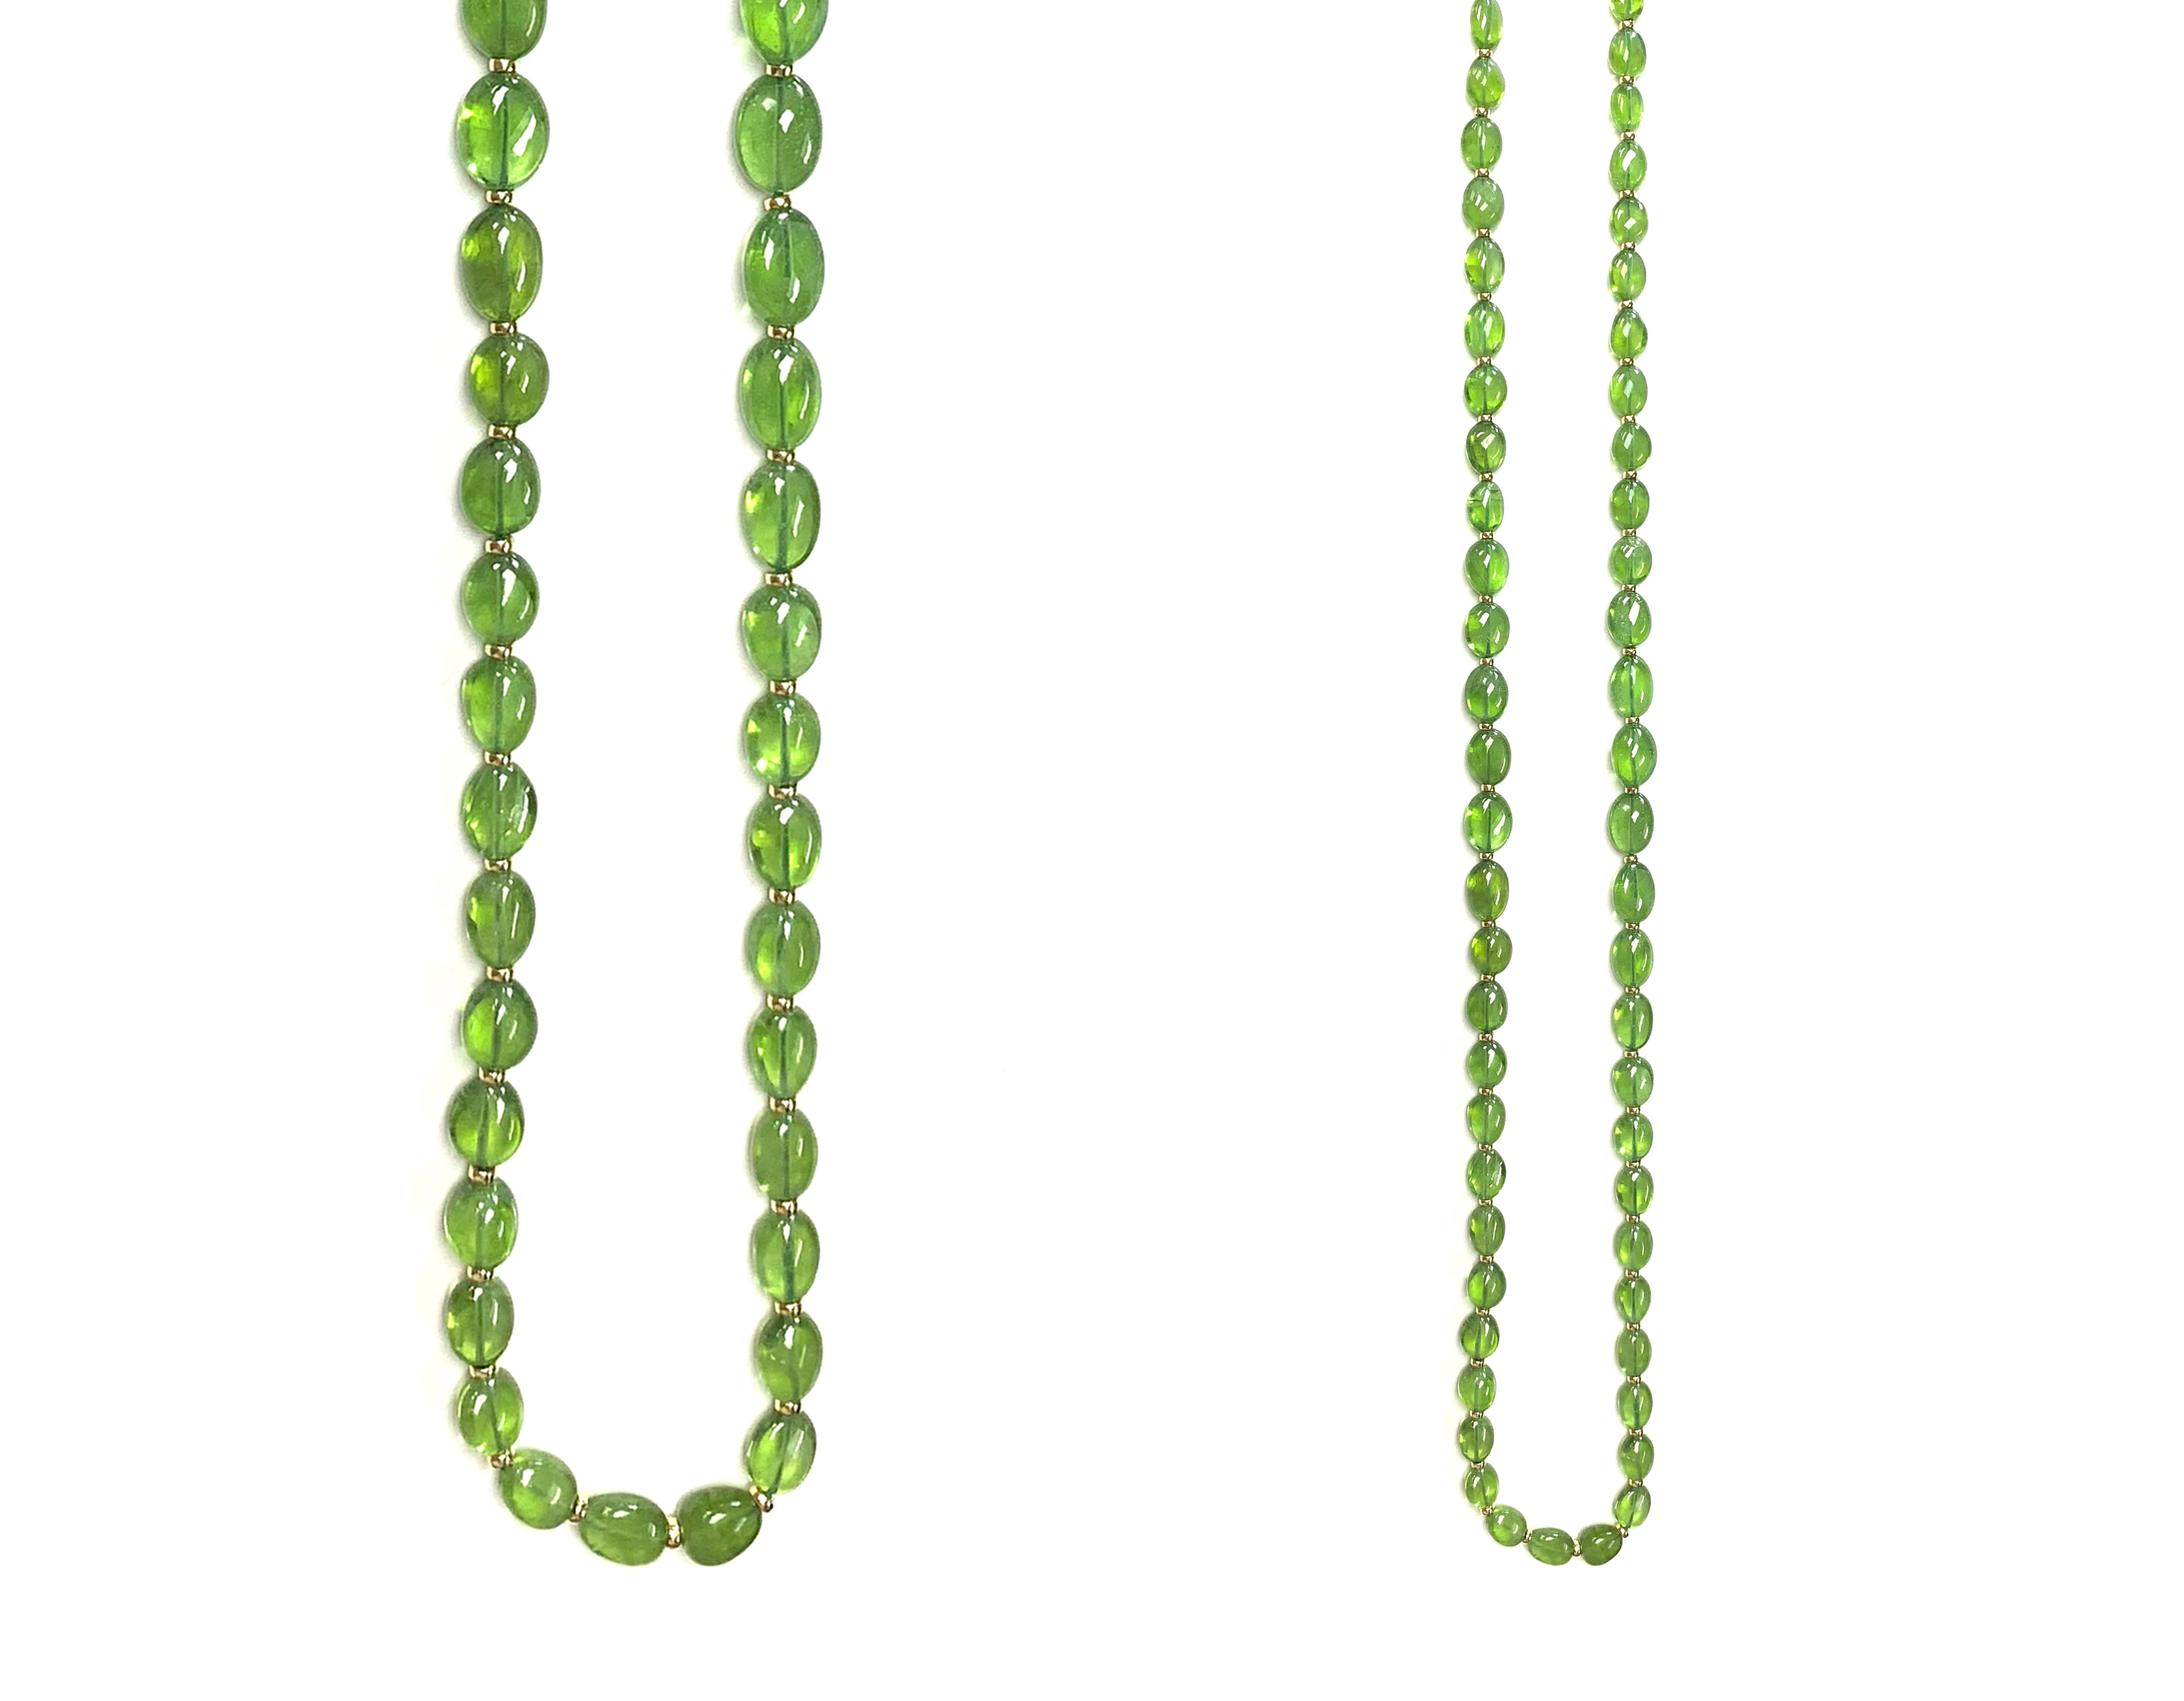 1 Strand Peridot Bead Necklace-37'' in 18K Yellow Gold, from 'Beyond' Collection

Gemstone Weight: 859.84 Carats